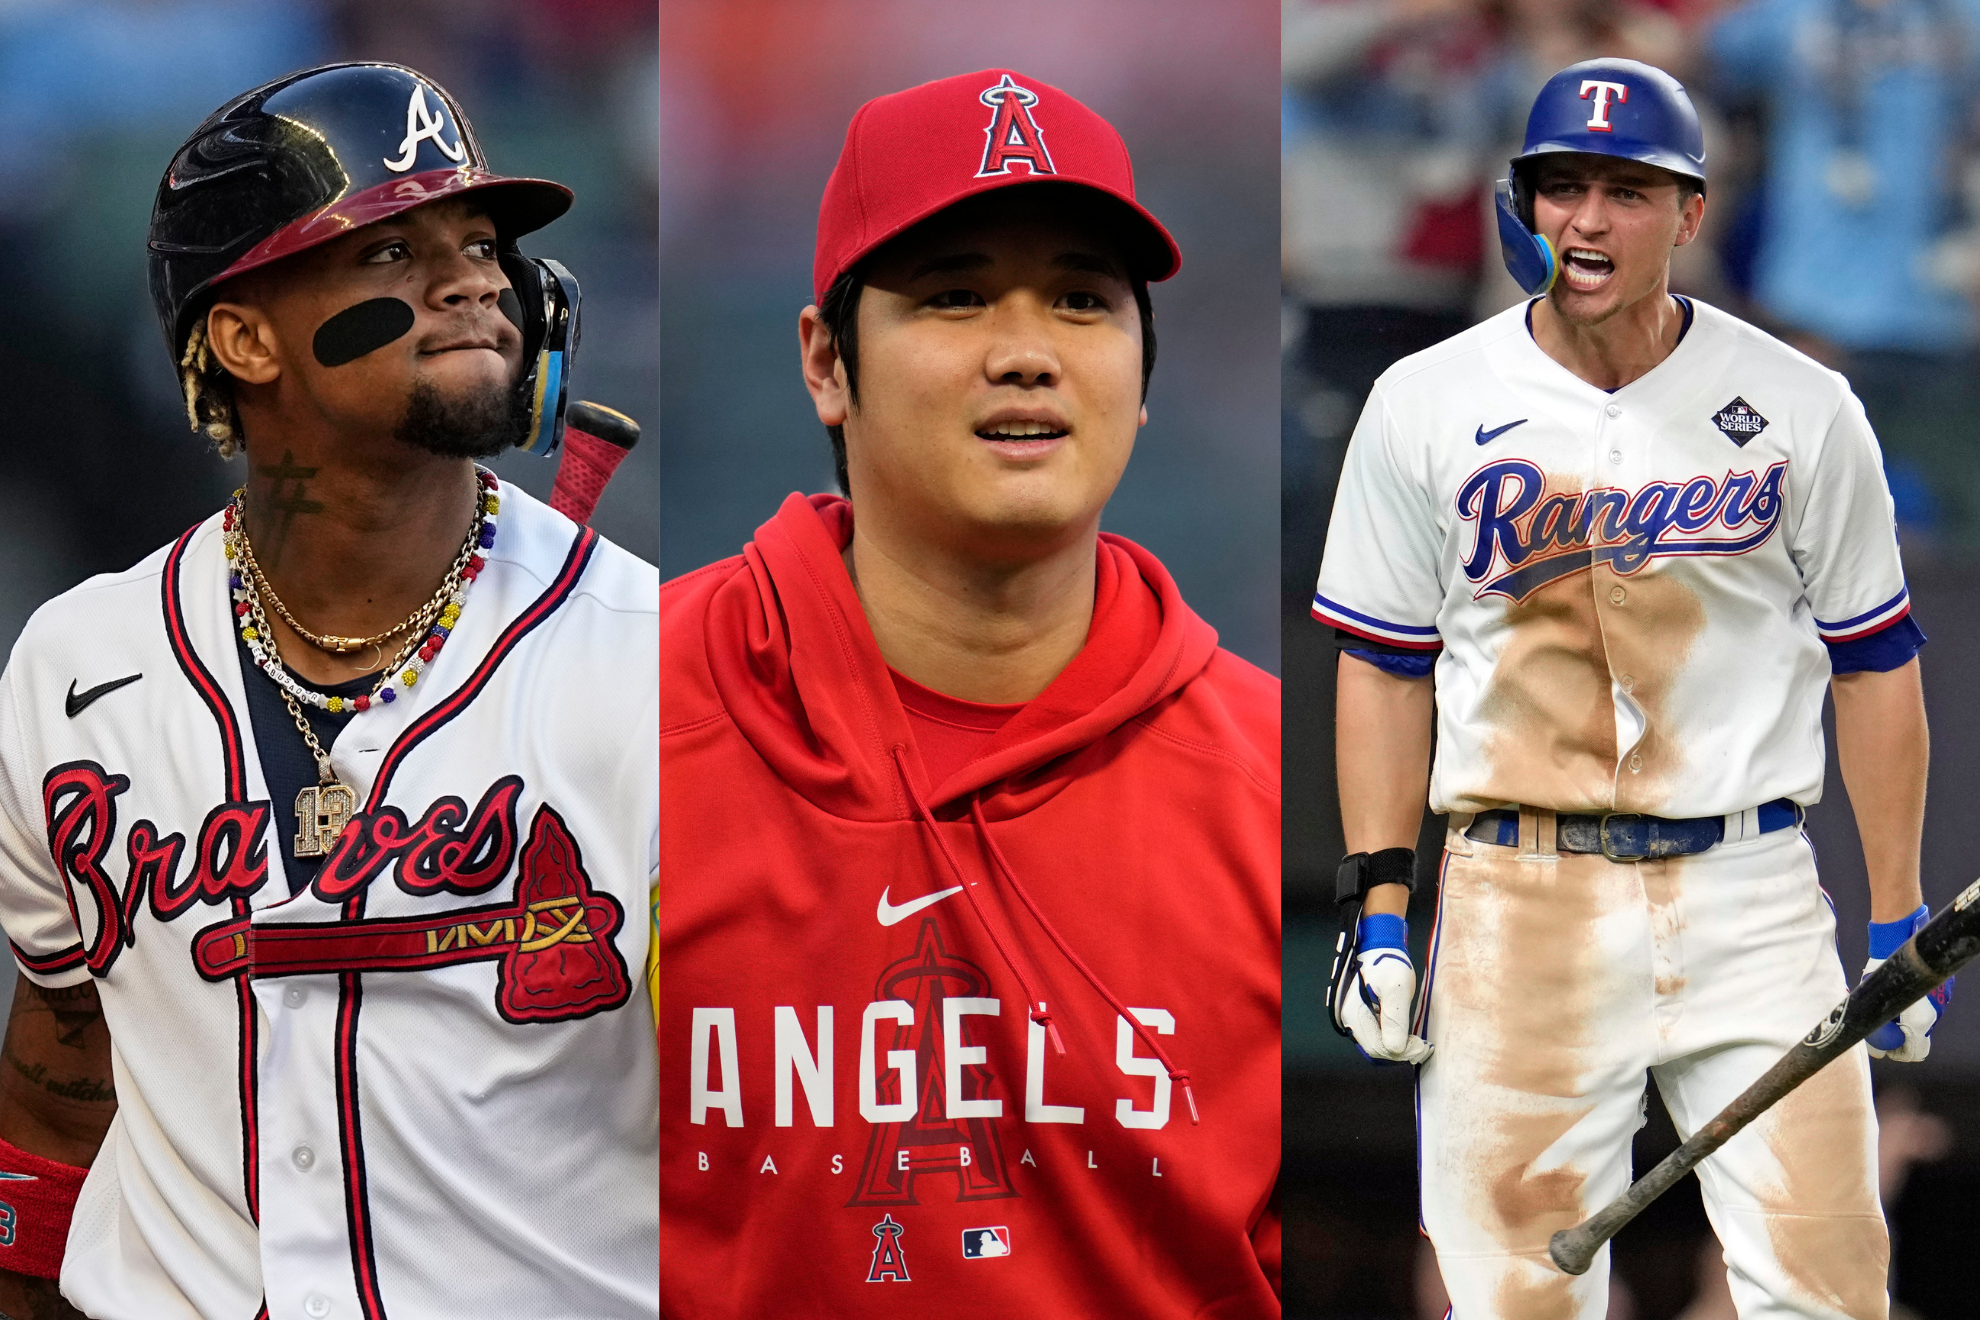 Acuña (left) is a leading candidate for NL MVP, while Ohtani and Seager will duke it out for AL MVP honors.